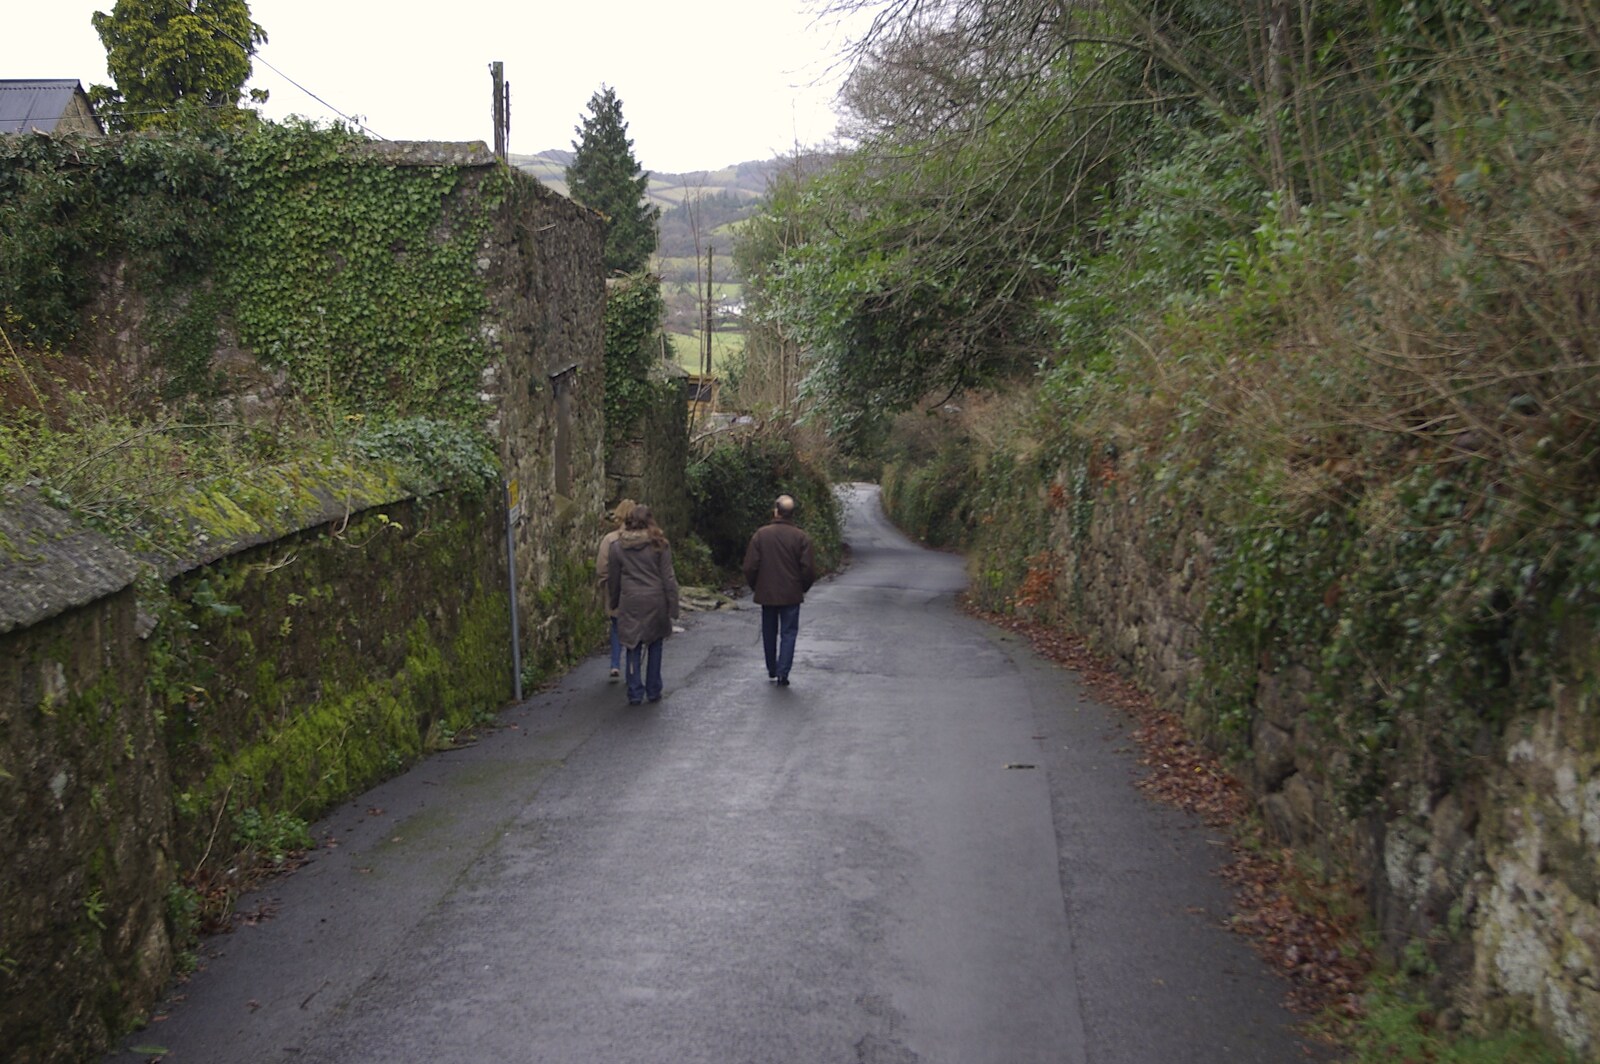 We head off for a walk around Chagford from Christmas at Sis and Matt's, Chagford, Devon - 25th December 2007